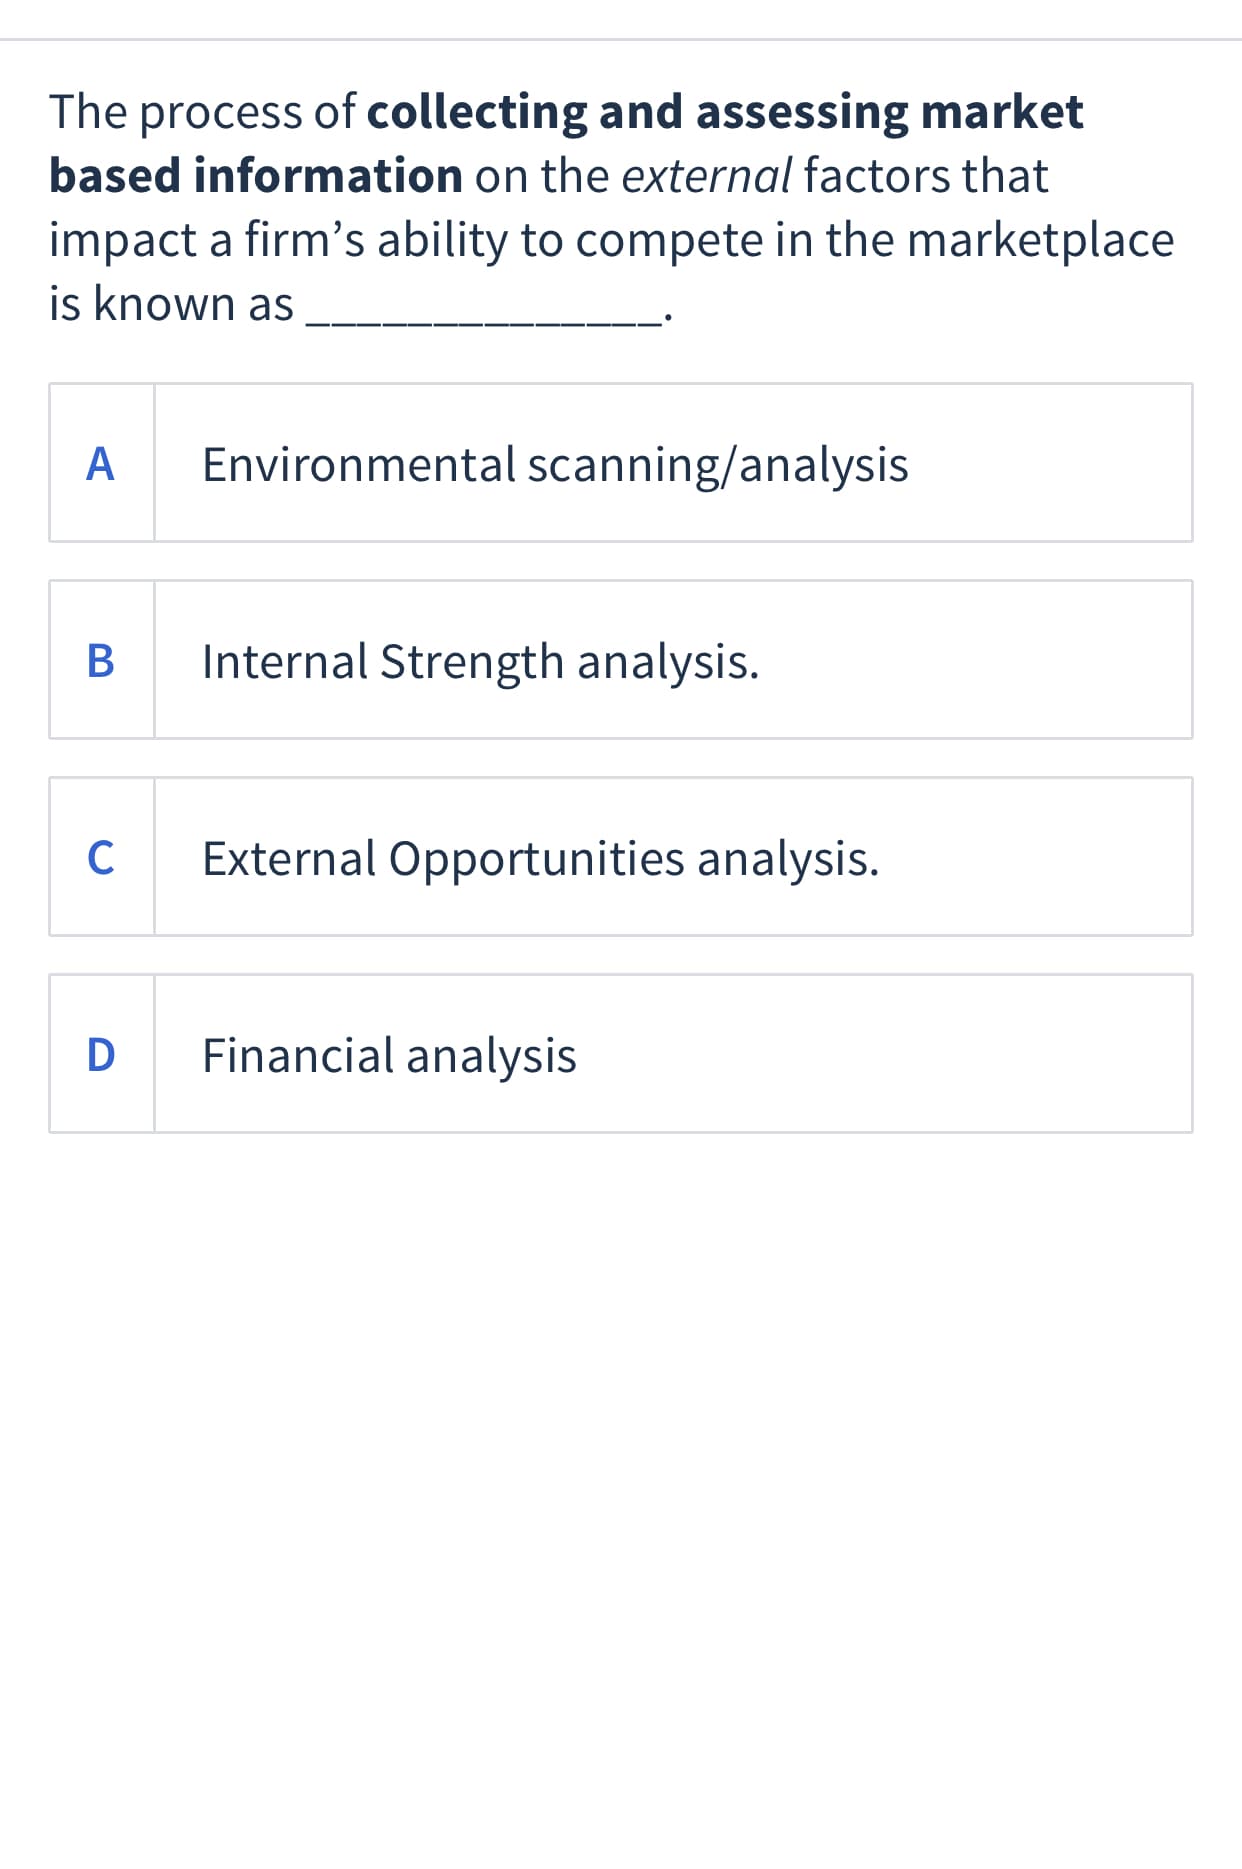 The process of collecting and assessing market
based information on the external factors that
impact a firm's ability to compete in the marketplace
is known as
A
Environmental scanning/analysis
Internal Strength analysis.
C
External Opportunities analysis.
D Financial analysis
